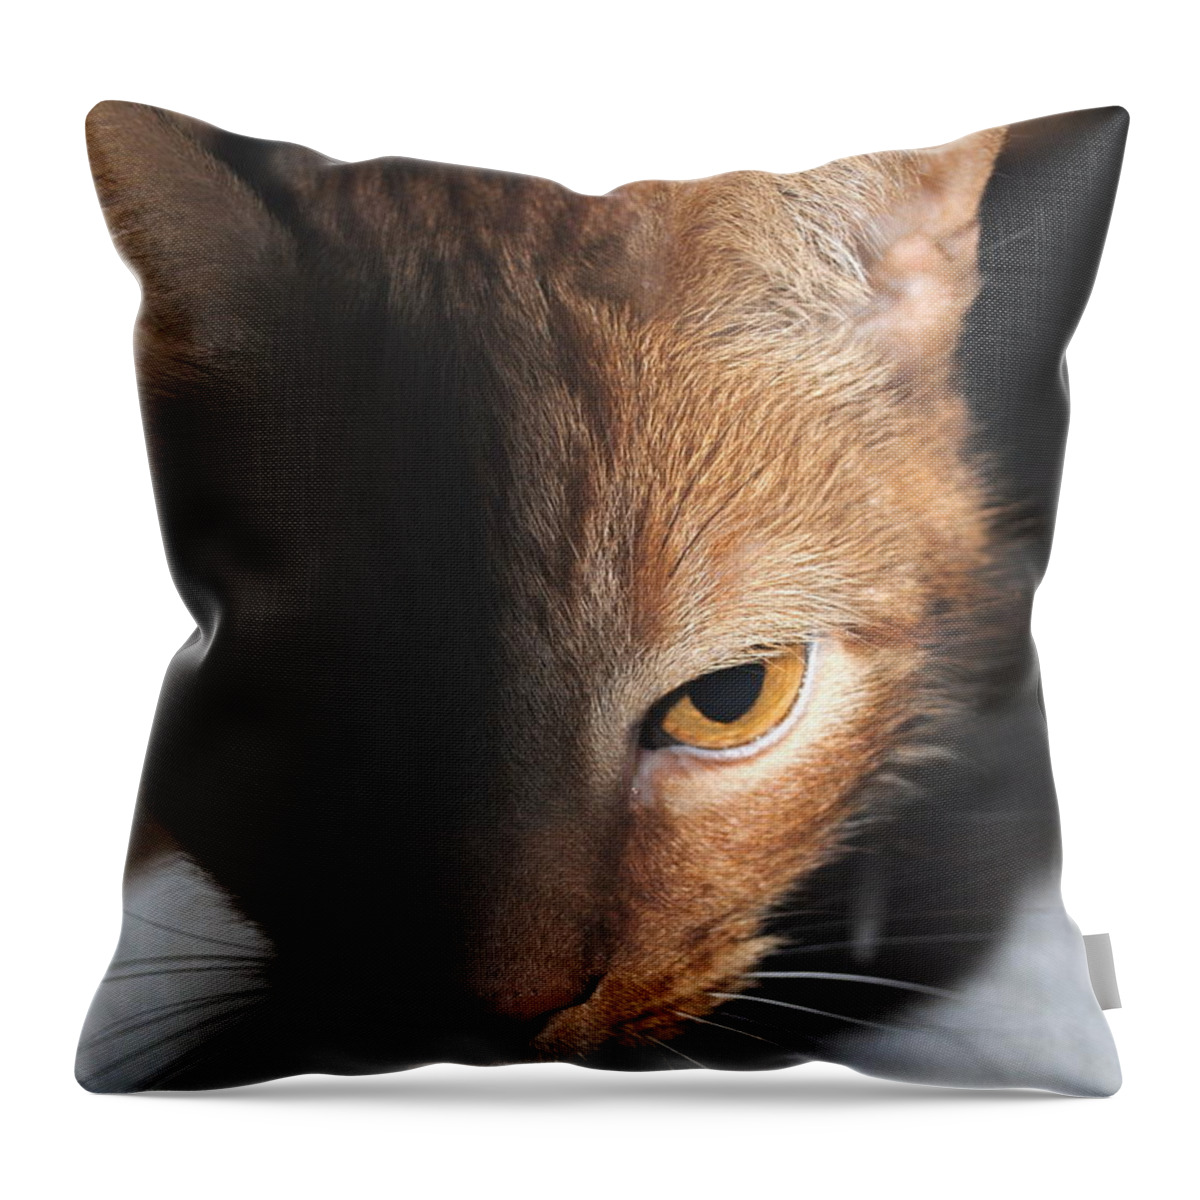 Cat Throw Pillow featuring the photograph Kitty by Jost Houk